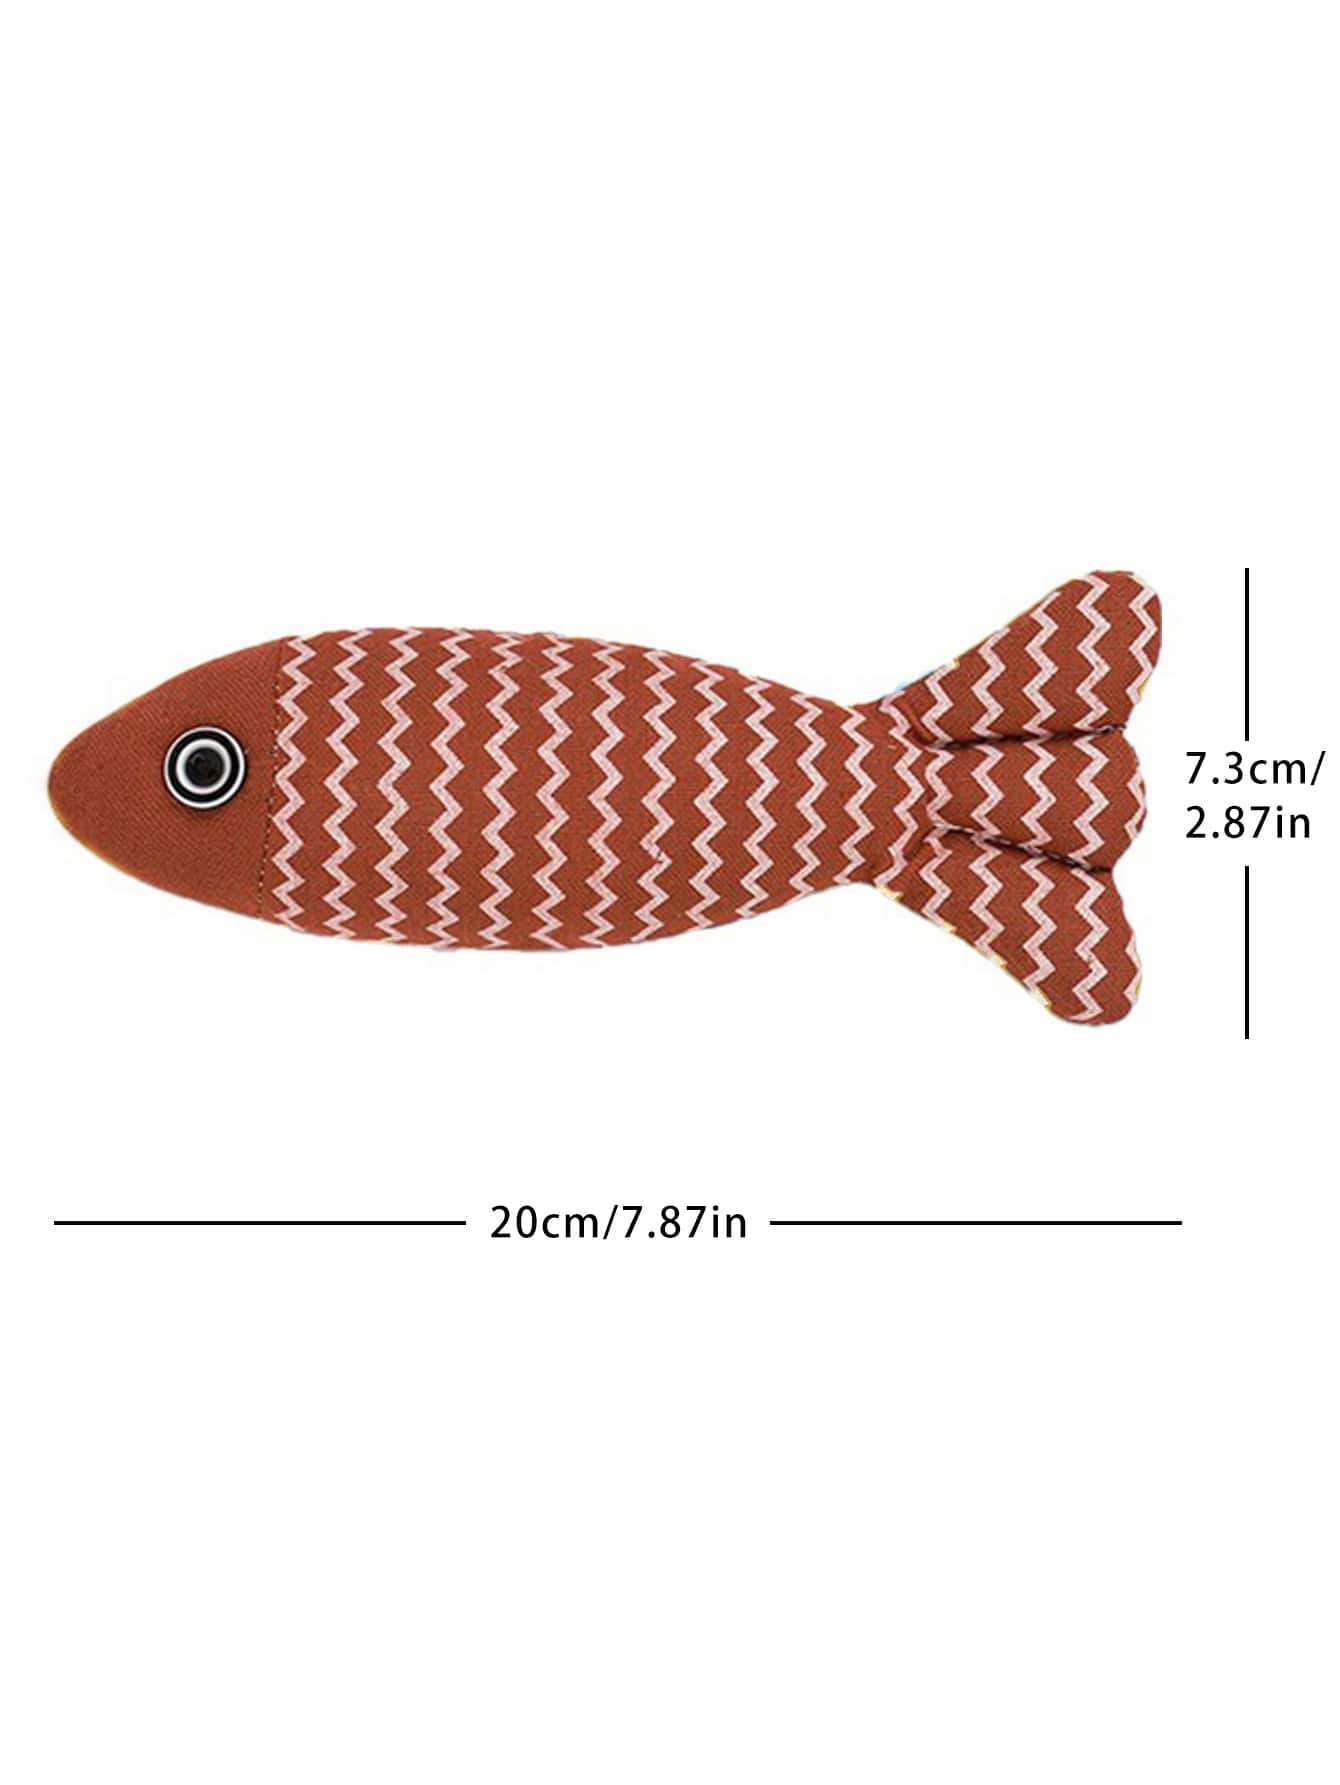 Includes Catnip Simulated Cloth Fish Interactive Cat Toy